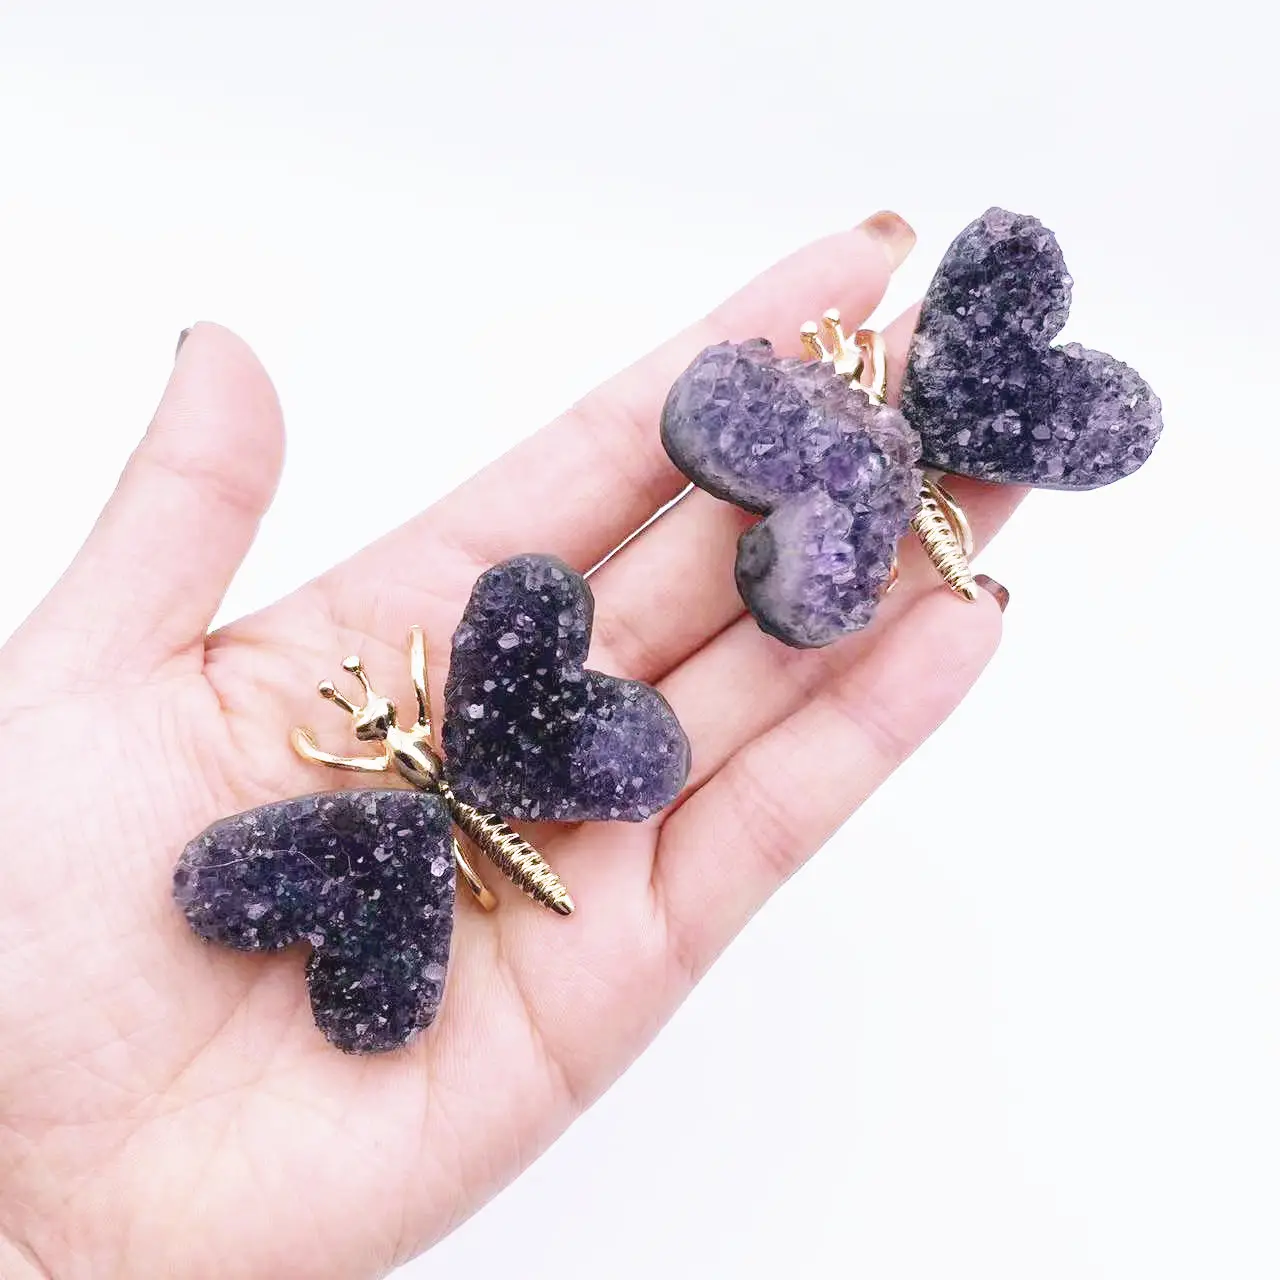 Natural crystal amethyst geode metal butterfly carved small feng shui folk crafts healing souvenirs stones